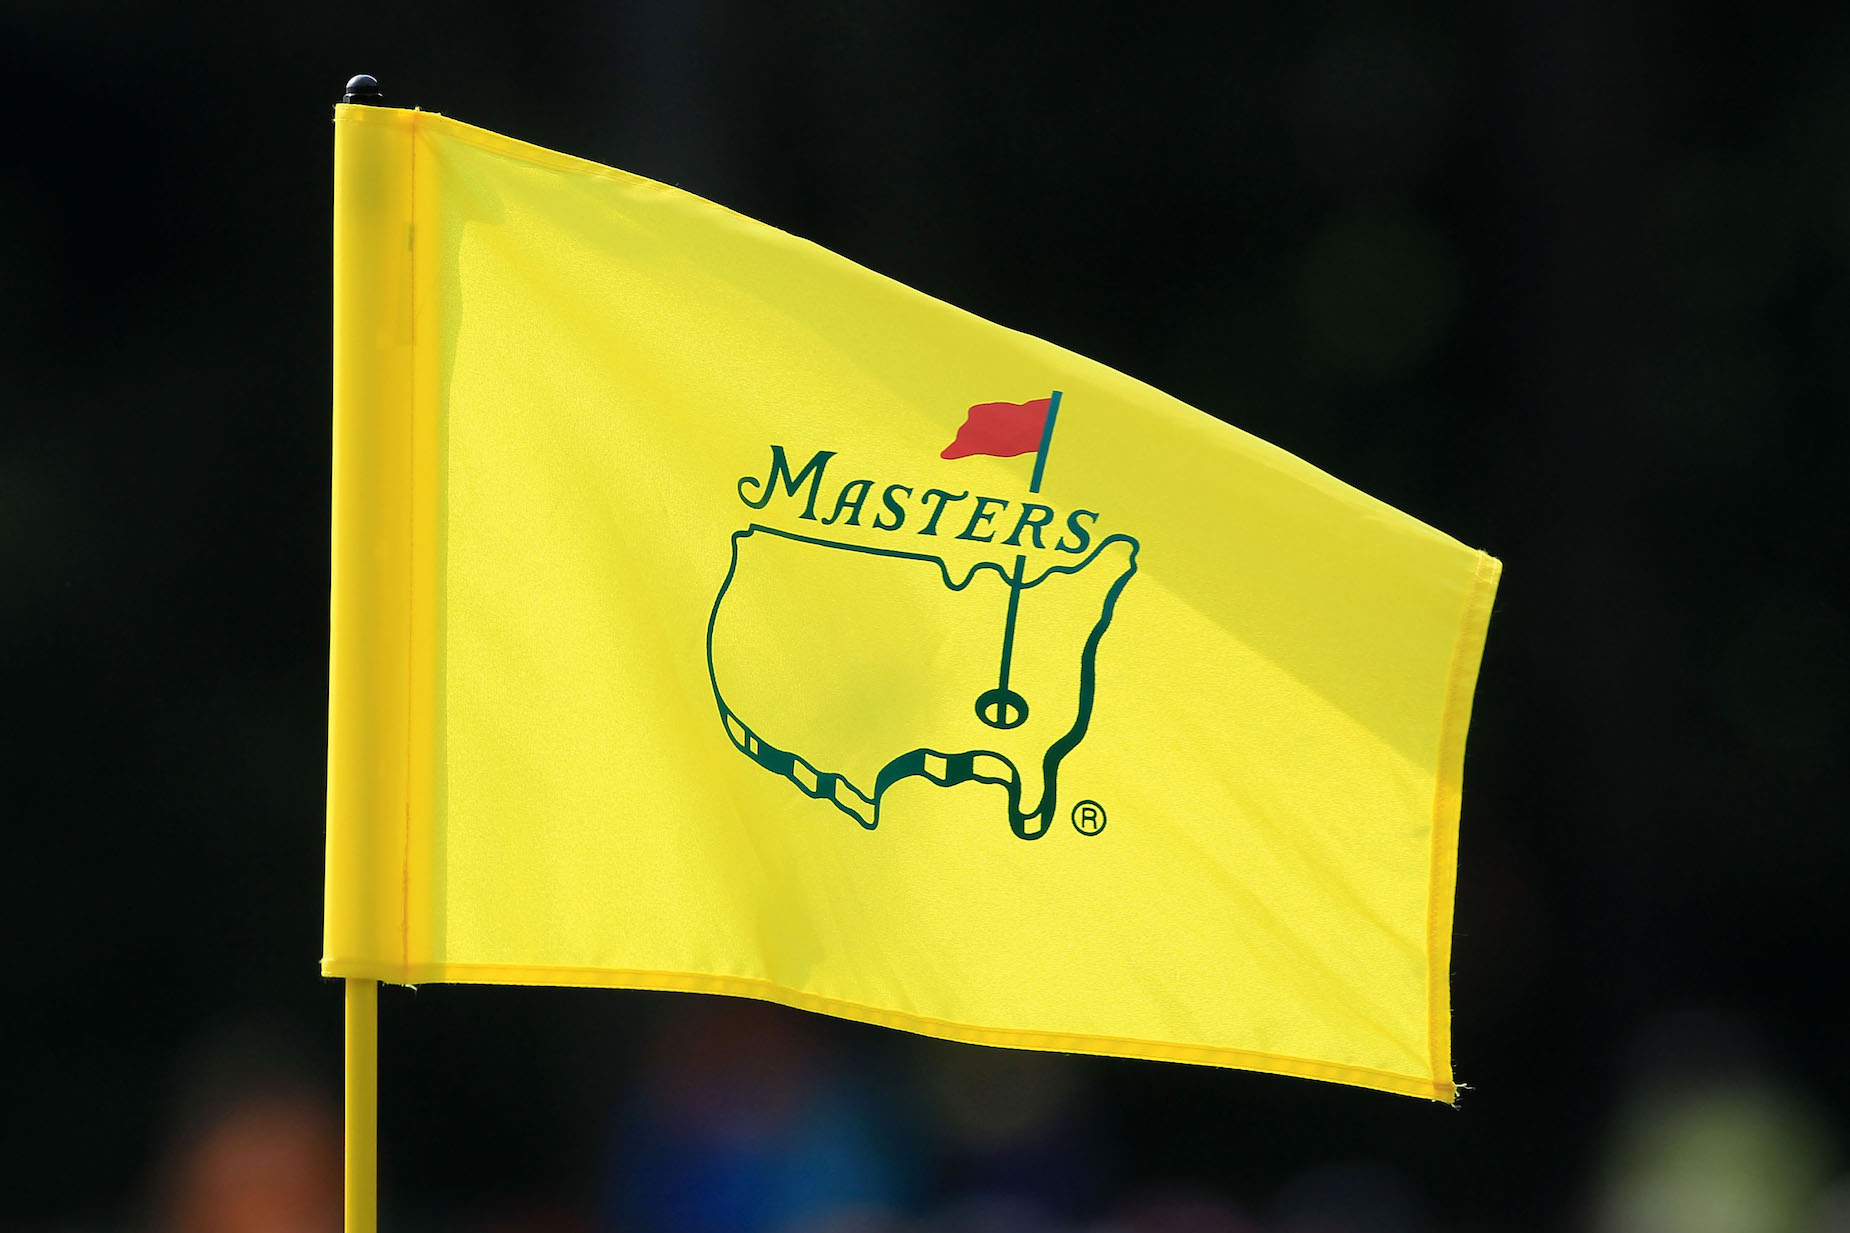 While every golf fan knows The Masters, how did the tournament get its iconic name.